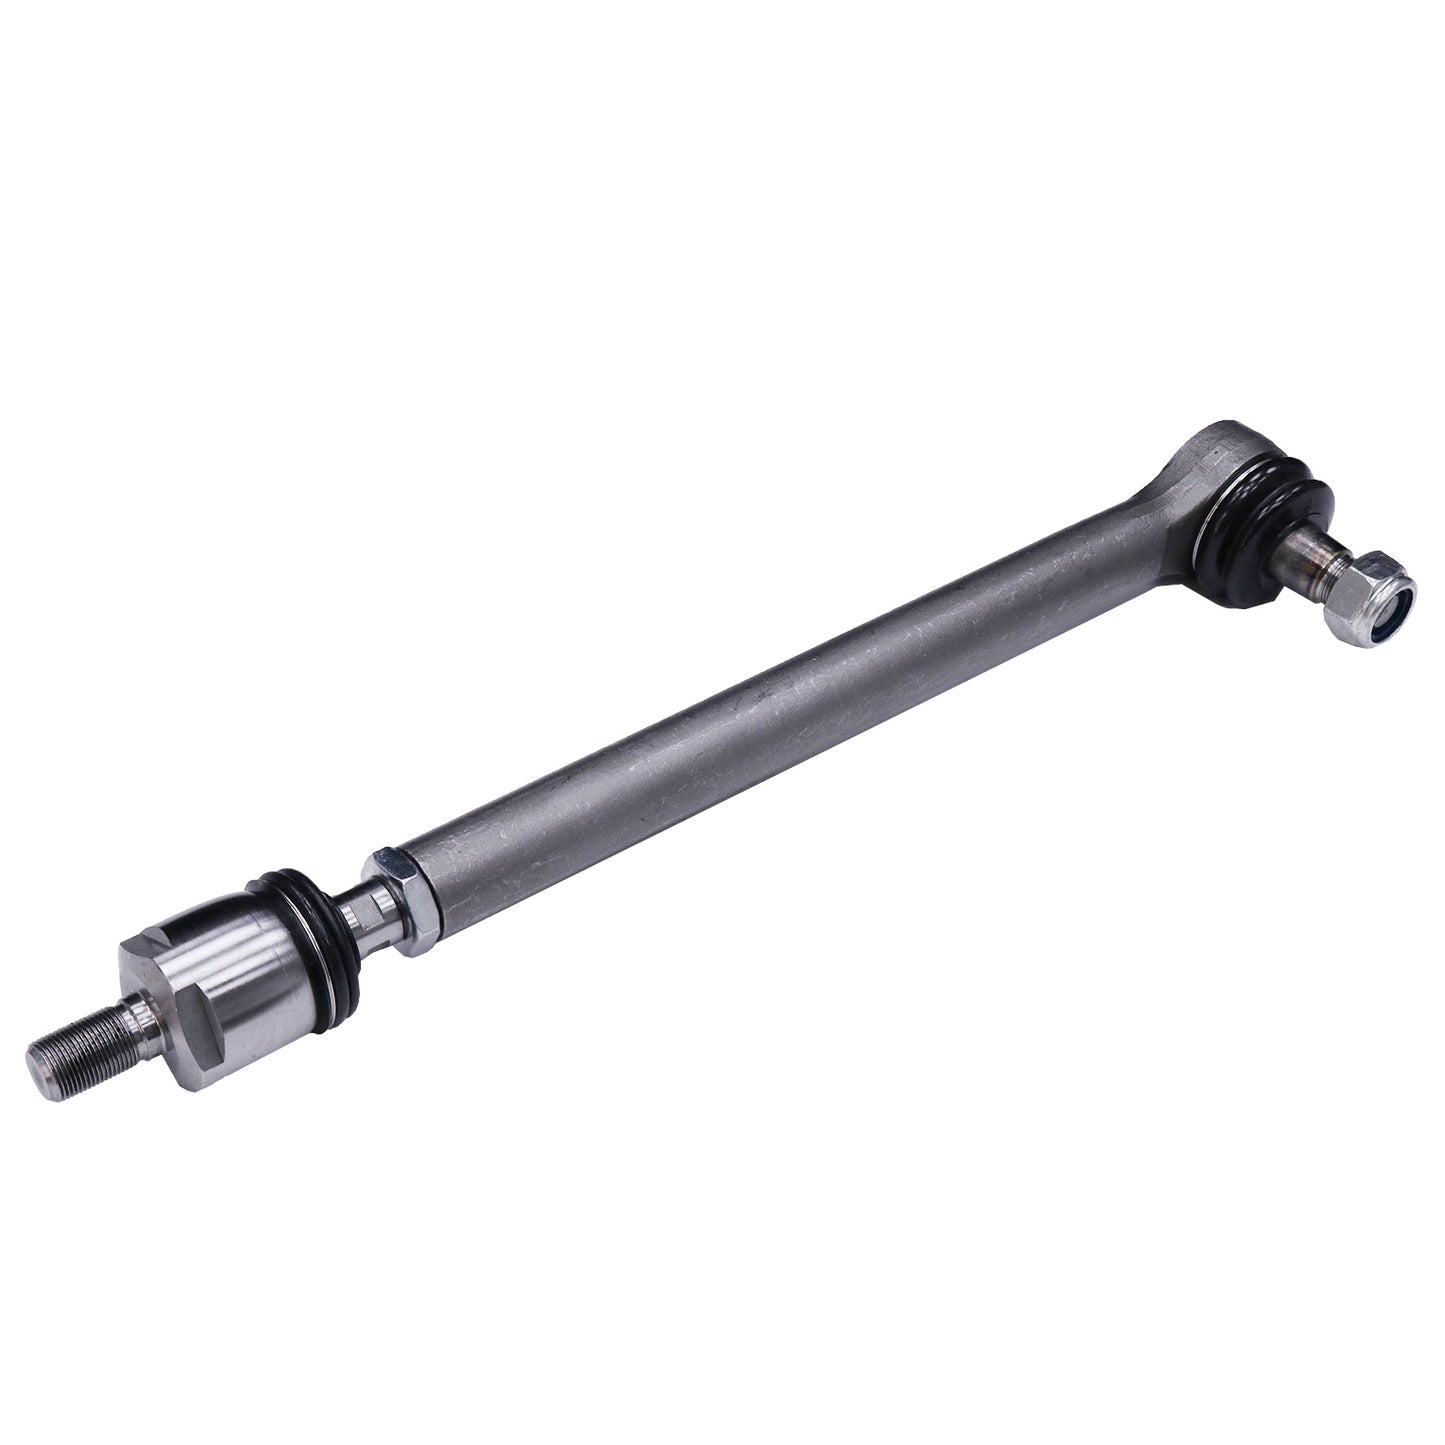 New 7-229-669GT Articulating Tie Rod Compatible with Genie SS-644C SS-842C TH636C TH644C TH842C TH844C GTH-644 GTH-842 GTH-844